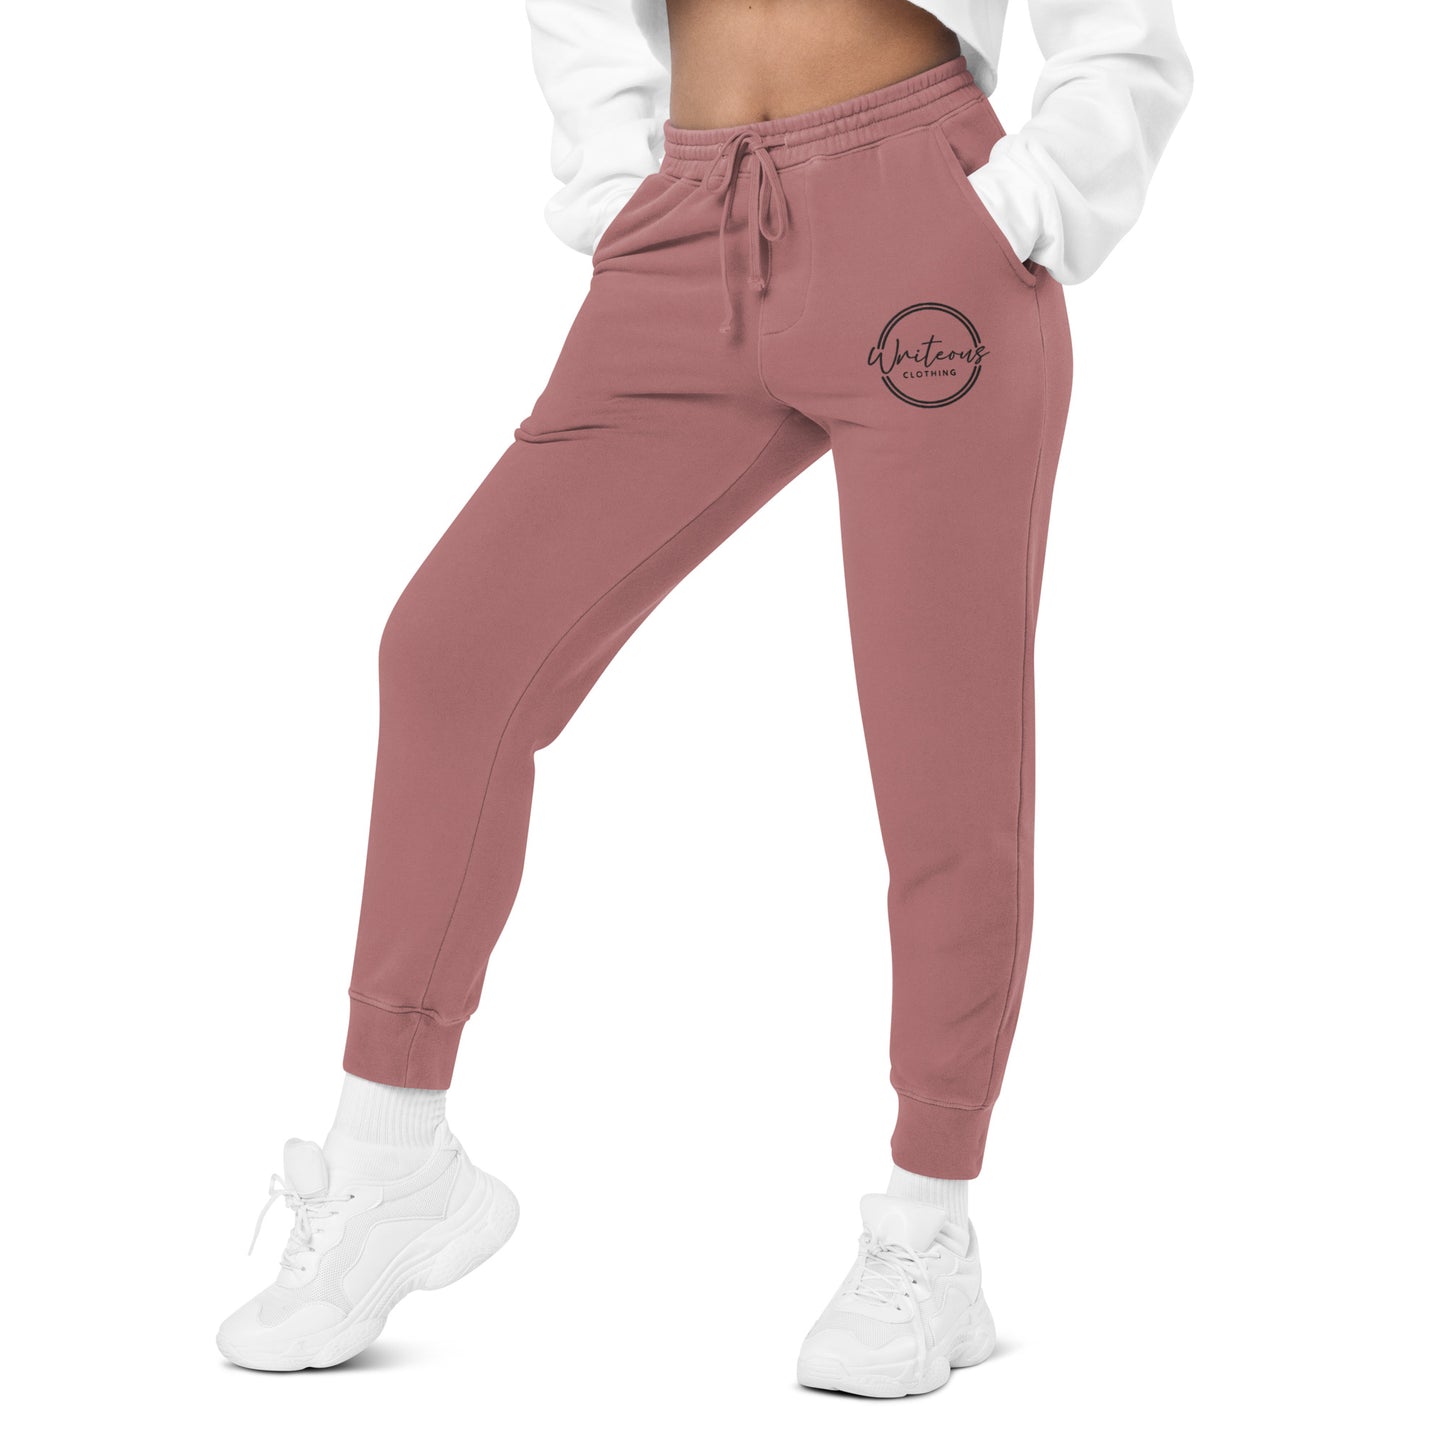 Embroidered Sweatpants